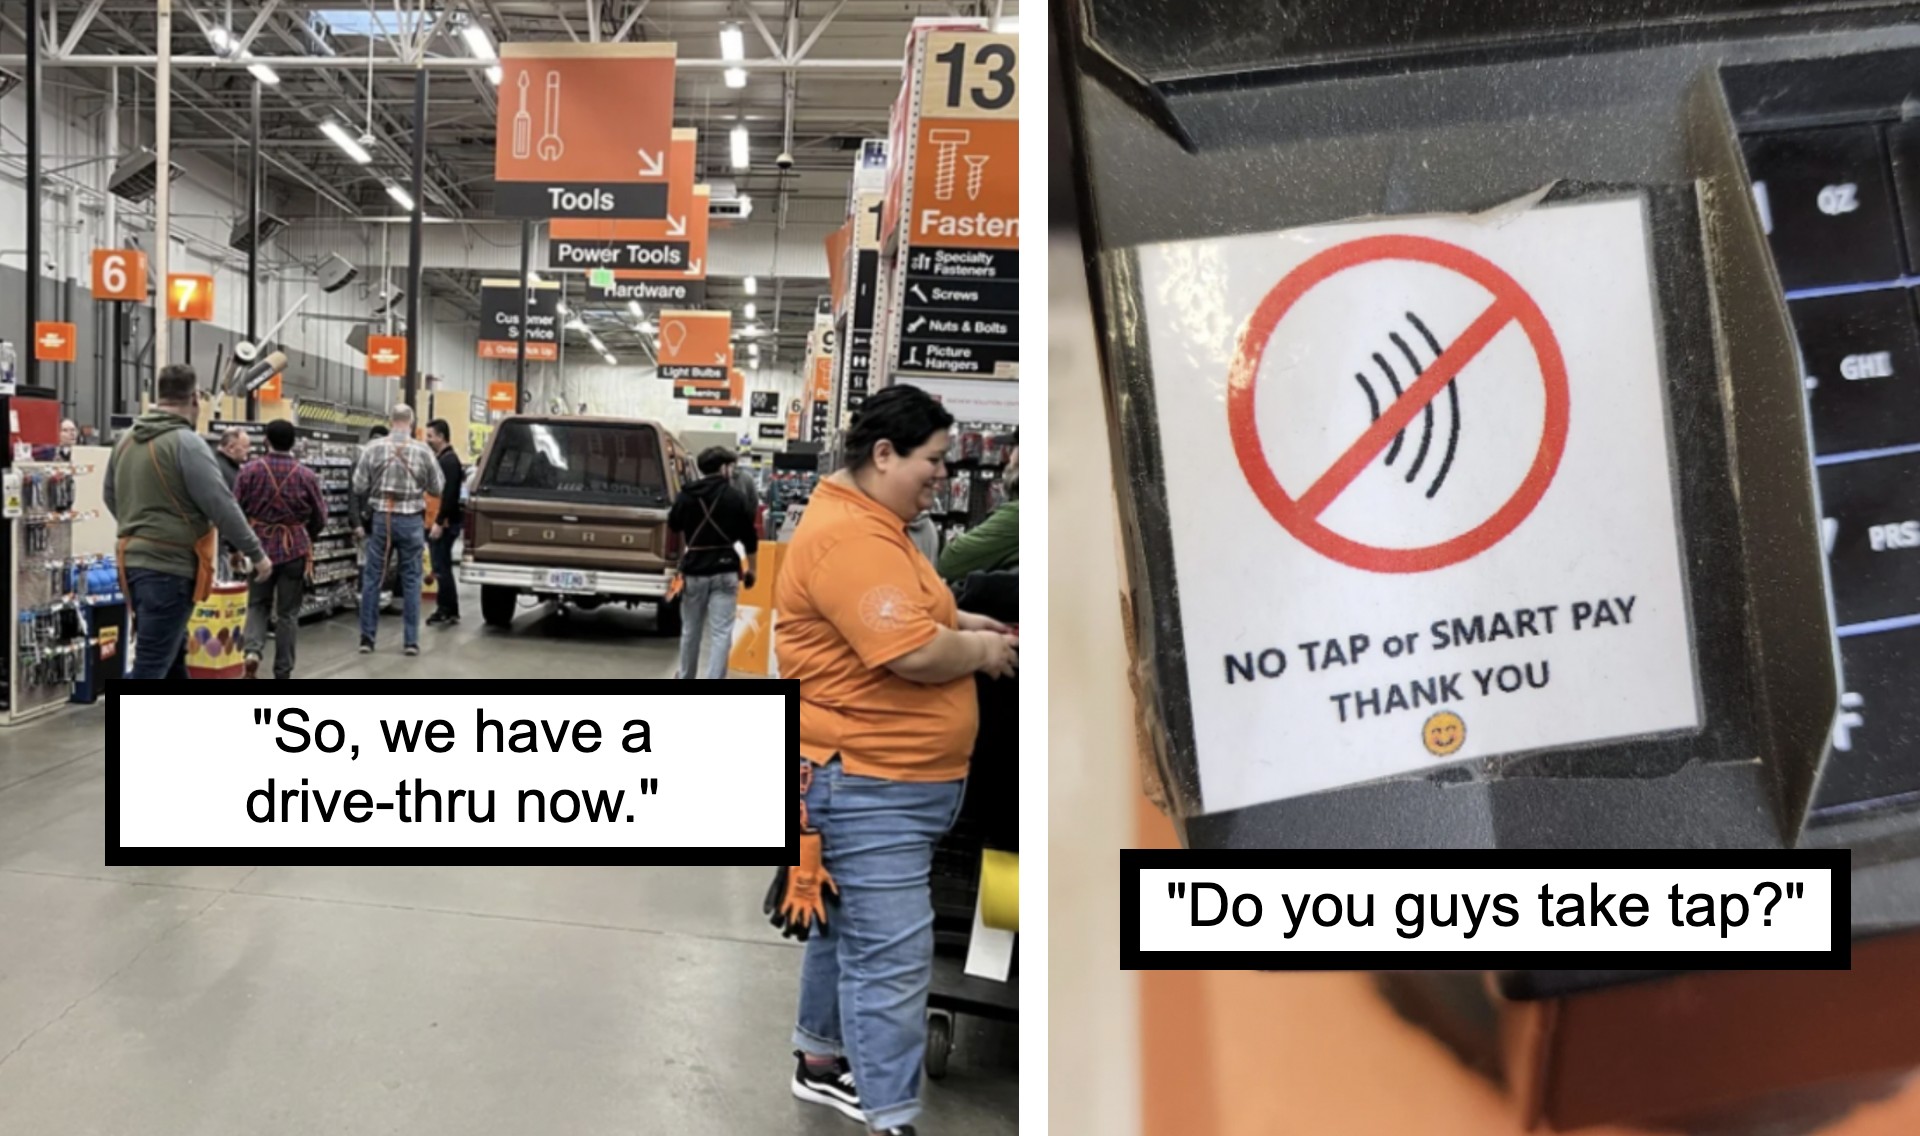 Left image shows a store aisle with a truck inside, customers and employees around it. Right image shows a sign on a card reader stating "No tap or smart pay, thank you," with a customer sarcastically asking, "Do you guys take tap?